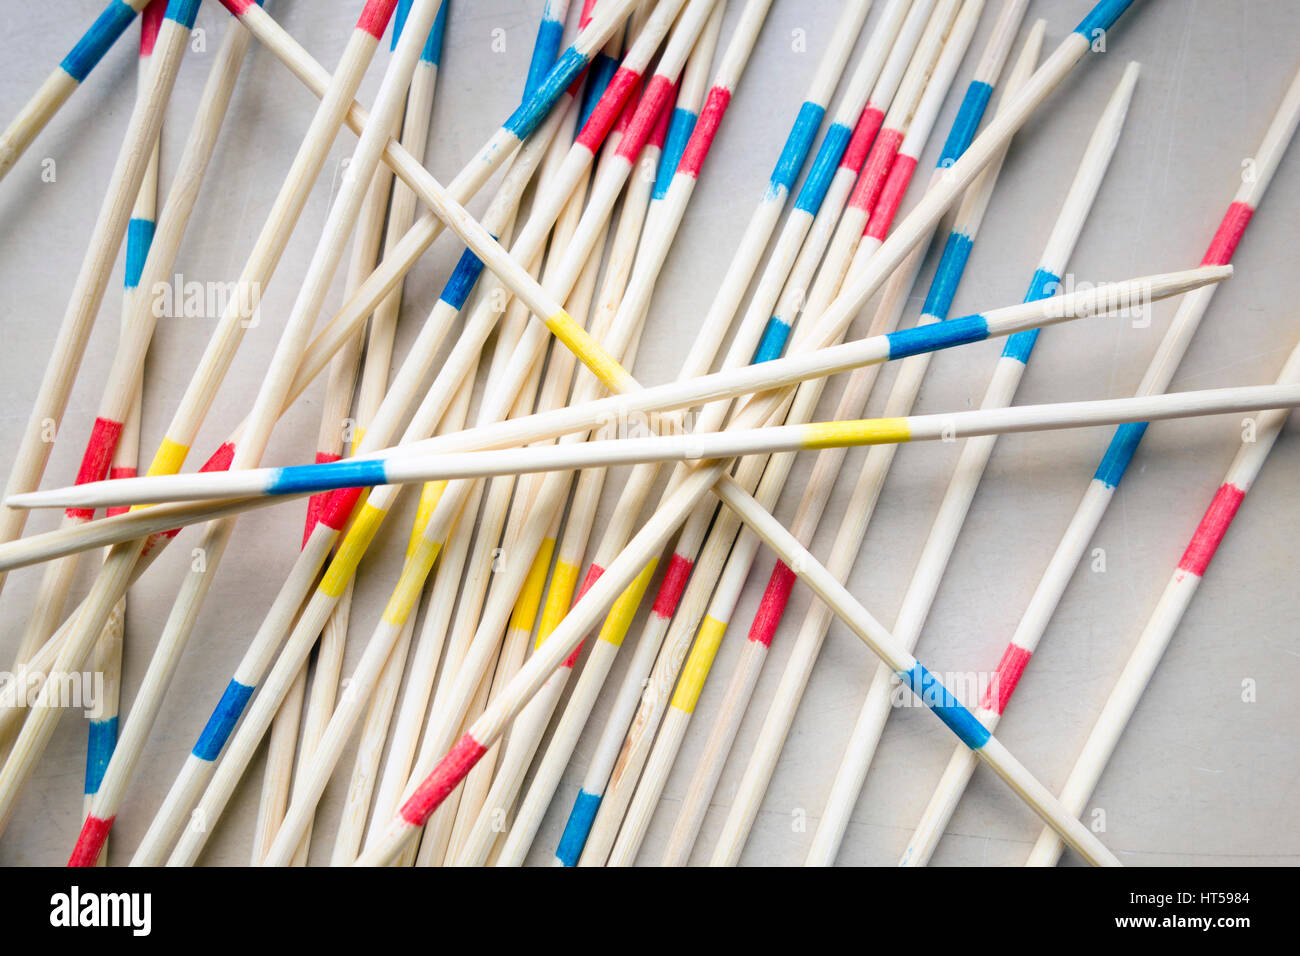 The Game Of Shangai Or Mikado Colored Plastic Sticks Stock Photo - Download  Image Now - iStock